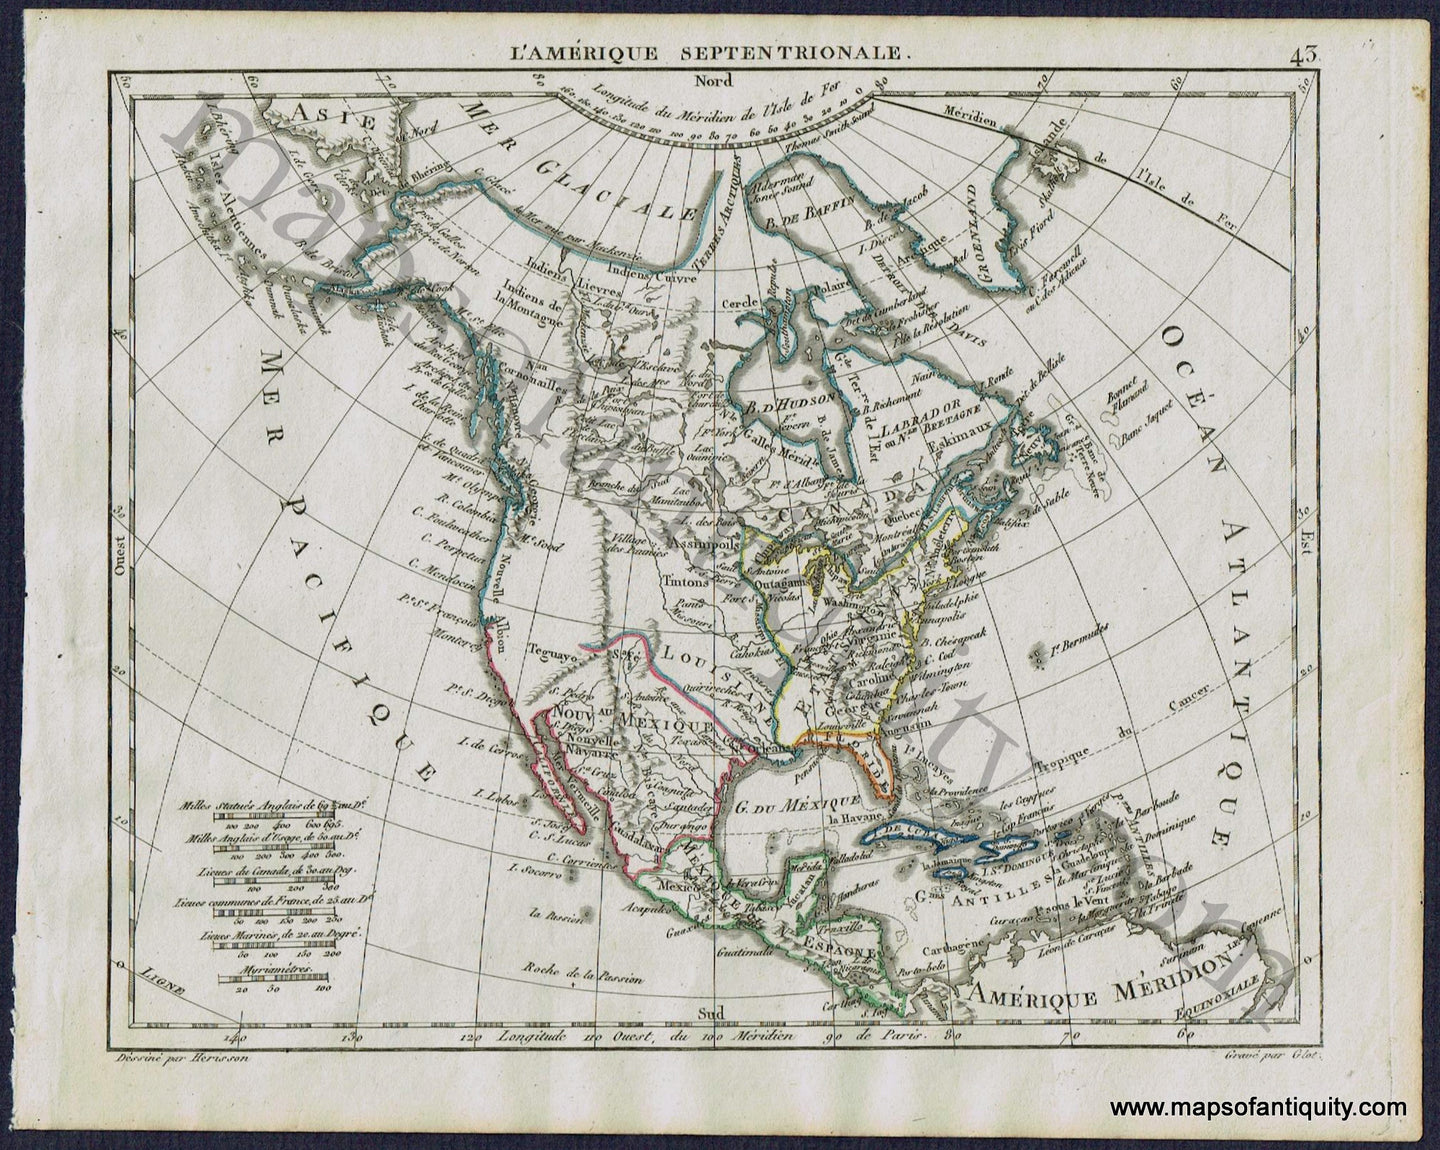 Antique-Map-North-America-L'Amerique-Septentrionale-Herrison-French-1806-1800s-Early-19th-Century-Maps-of-Antiquity